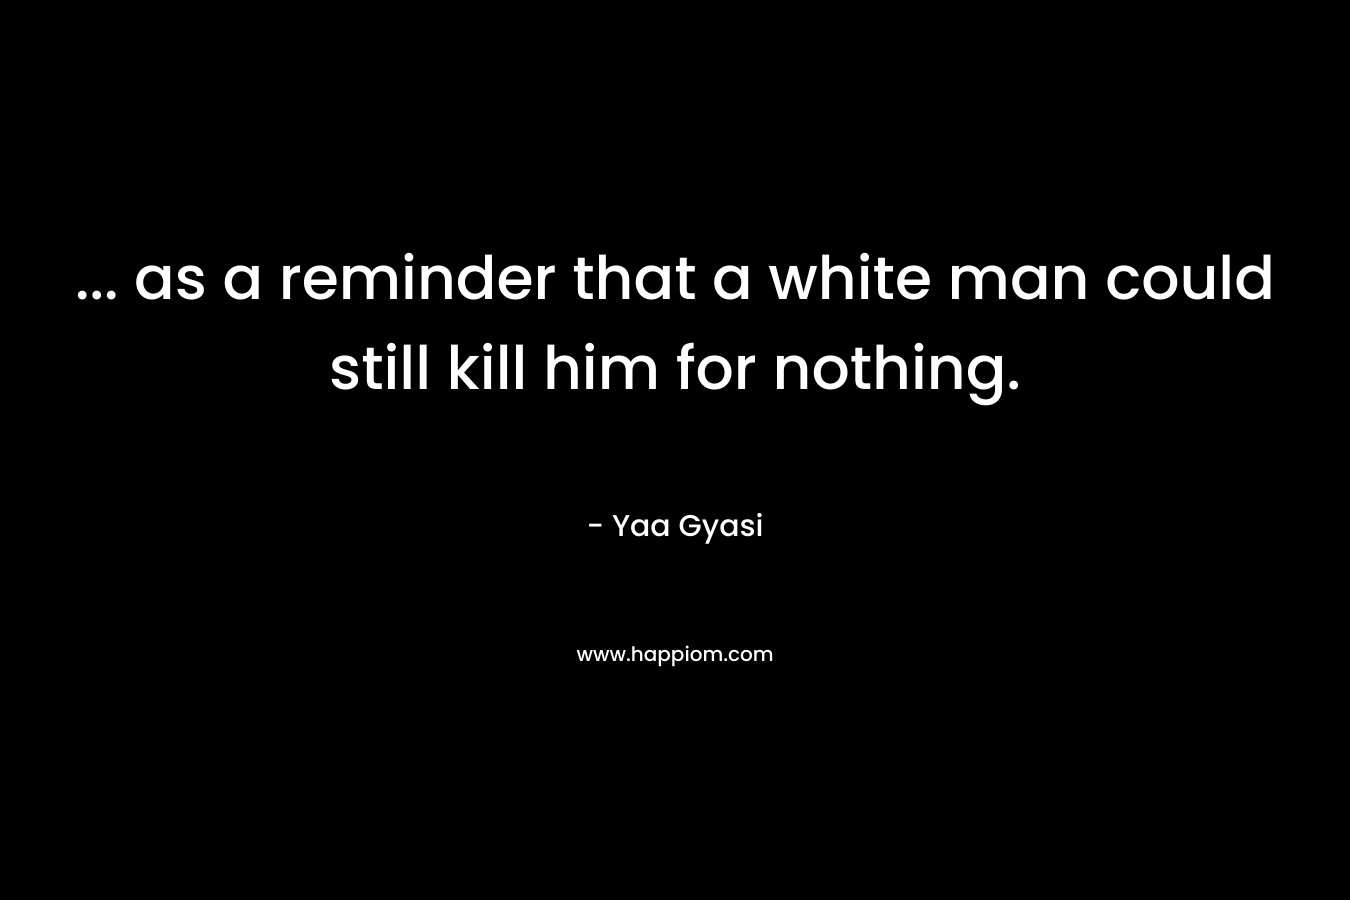 ... as a reminder that a white man could still kill him for nothing.